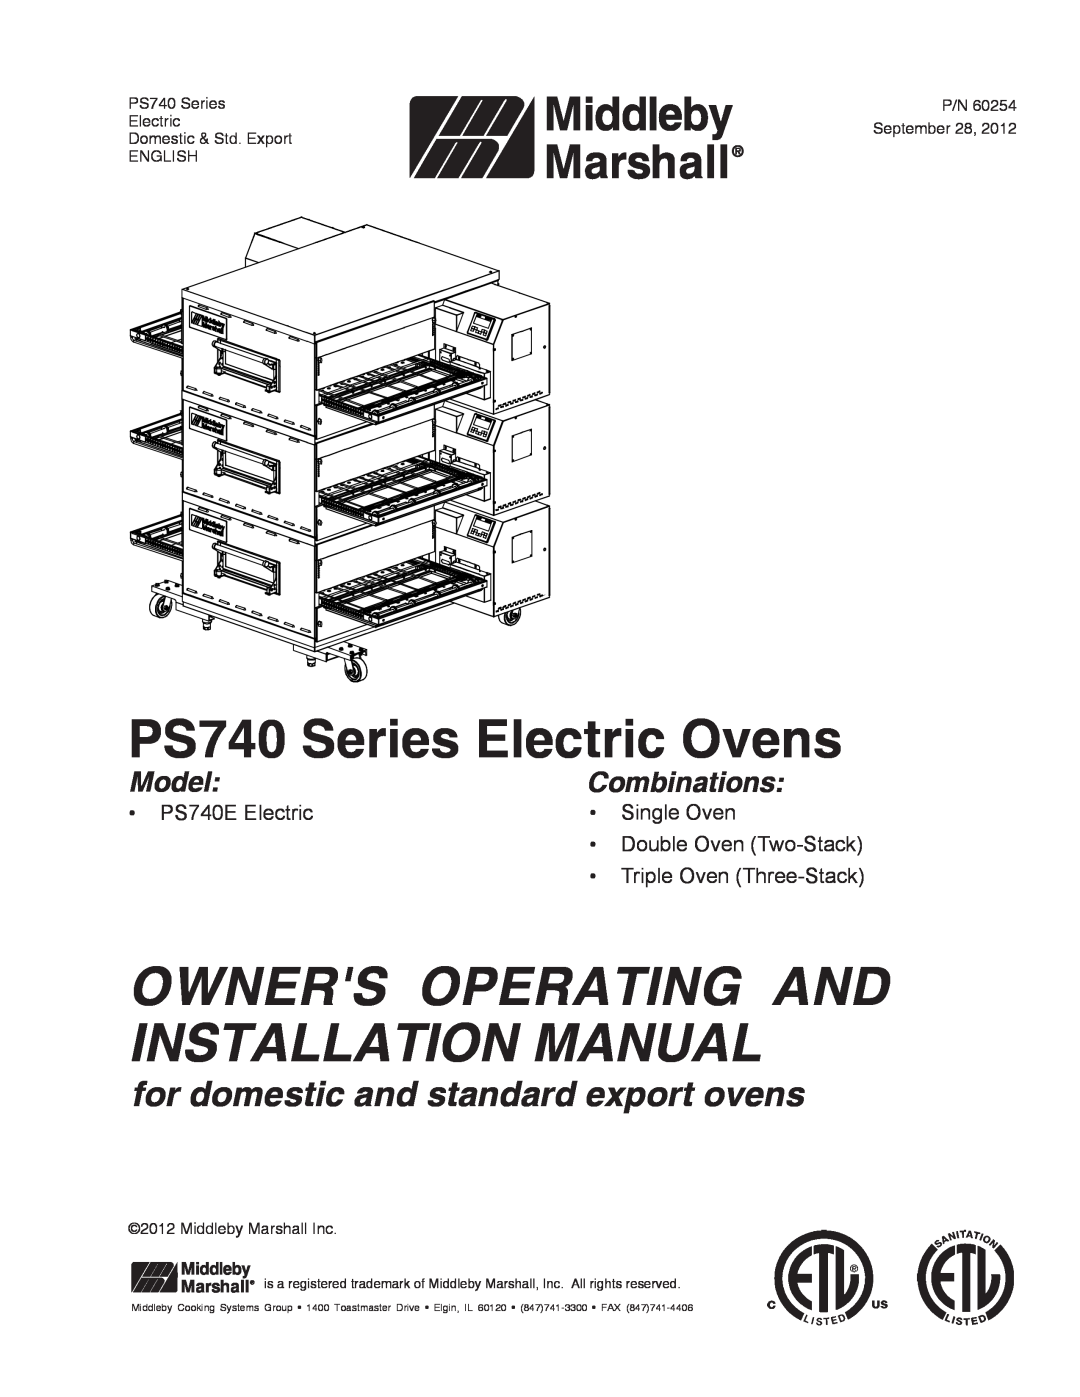 Middleby Marshall 60254 installation manual PS740 Series Electric Ovens, Owners Operating And Installation Manual, Model 